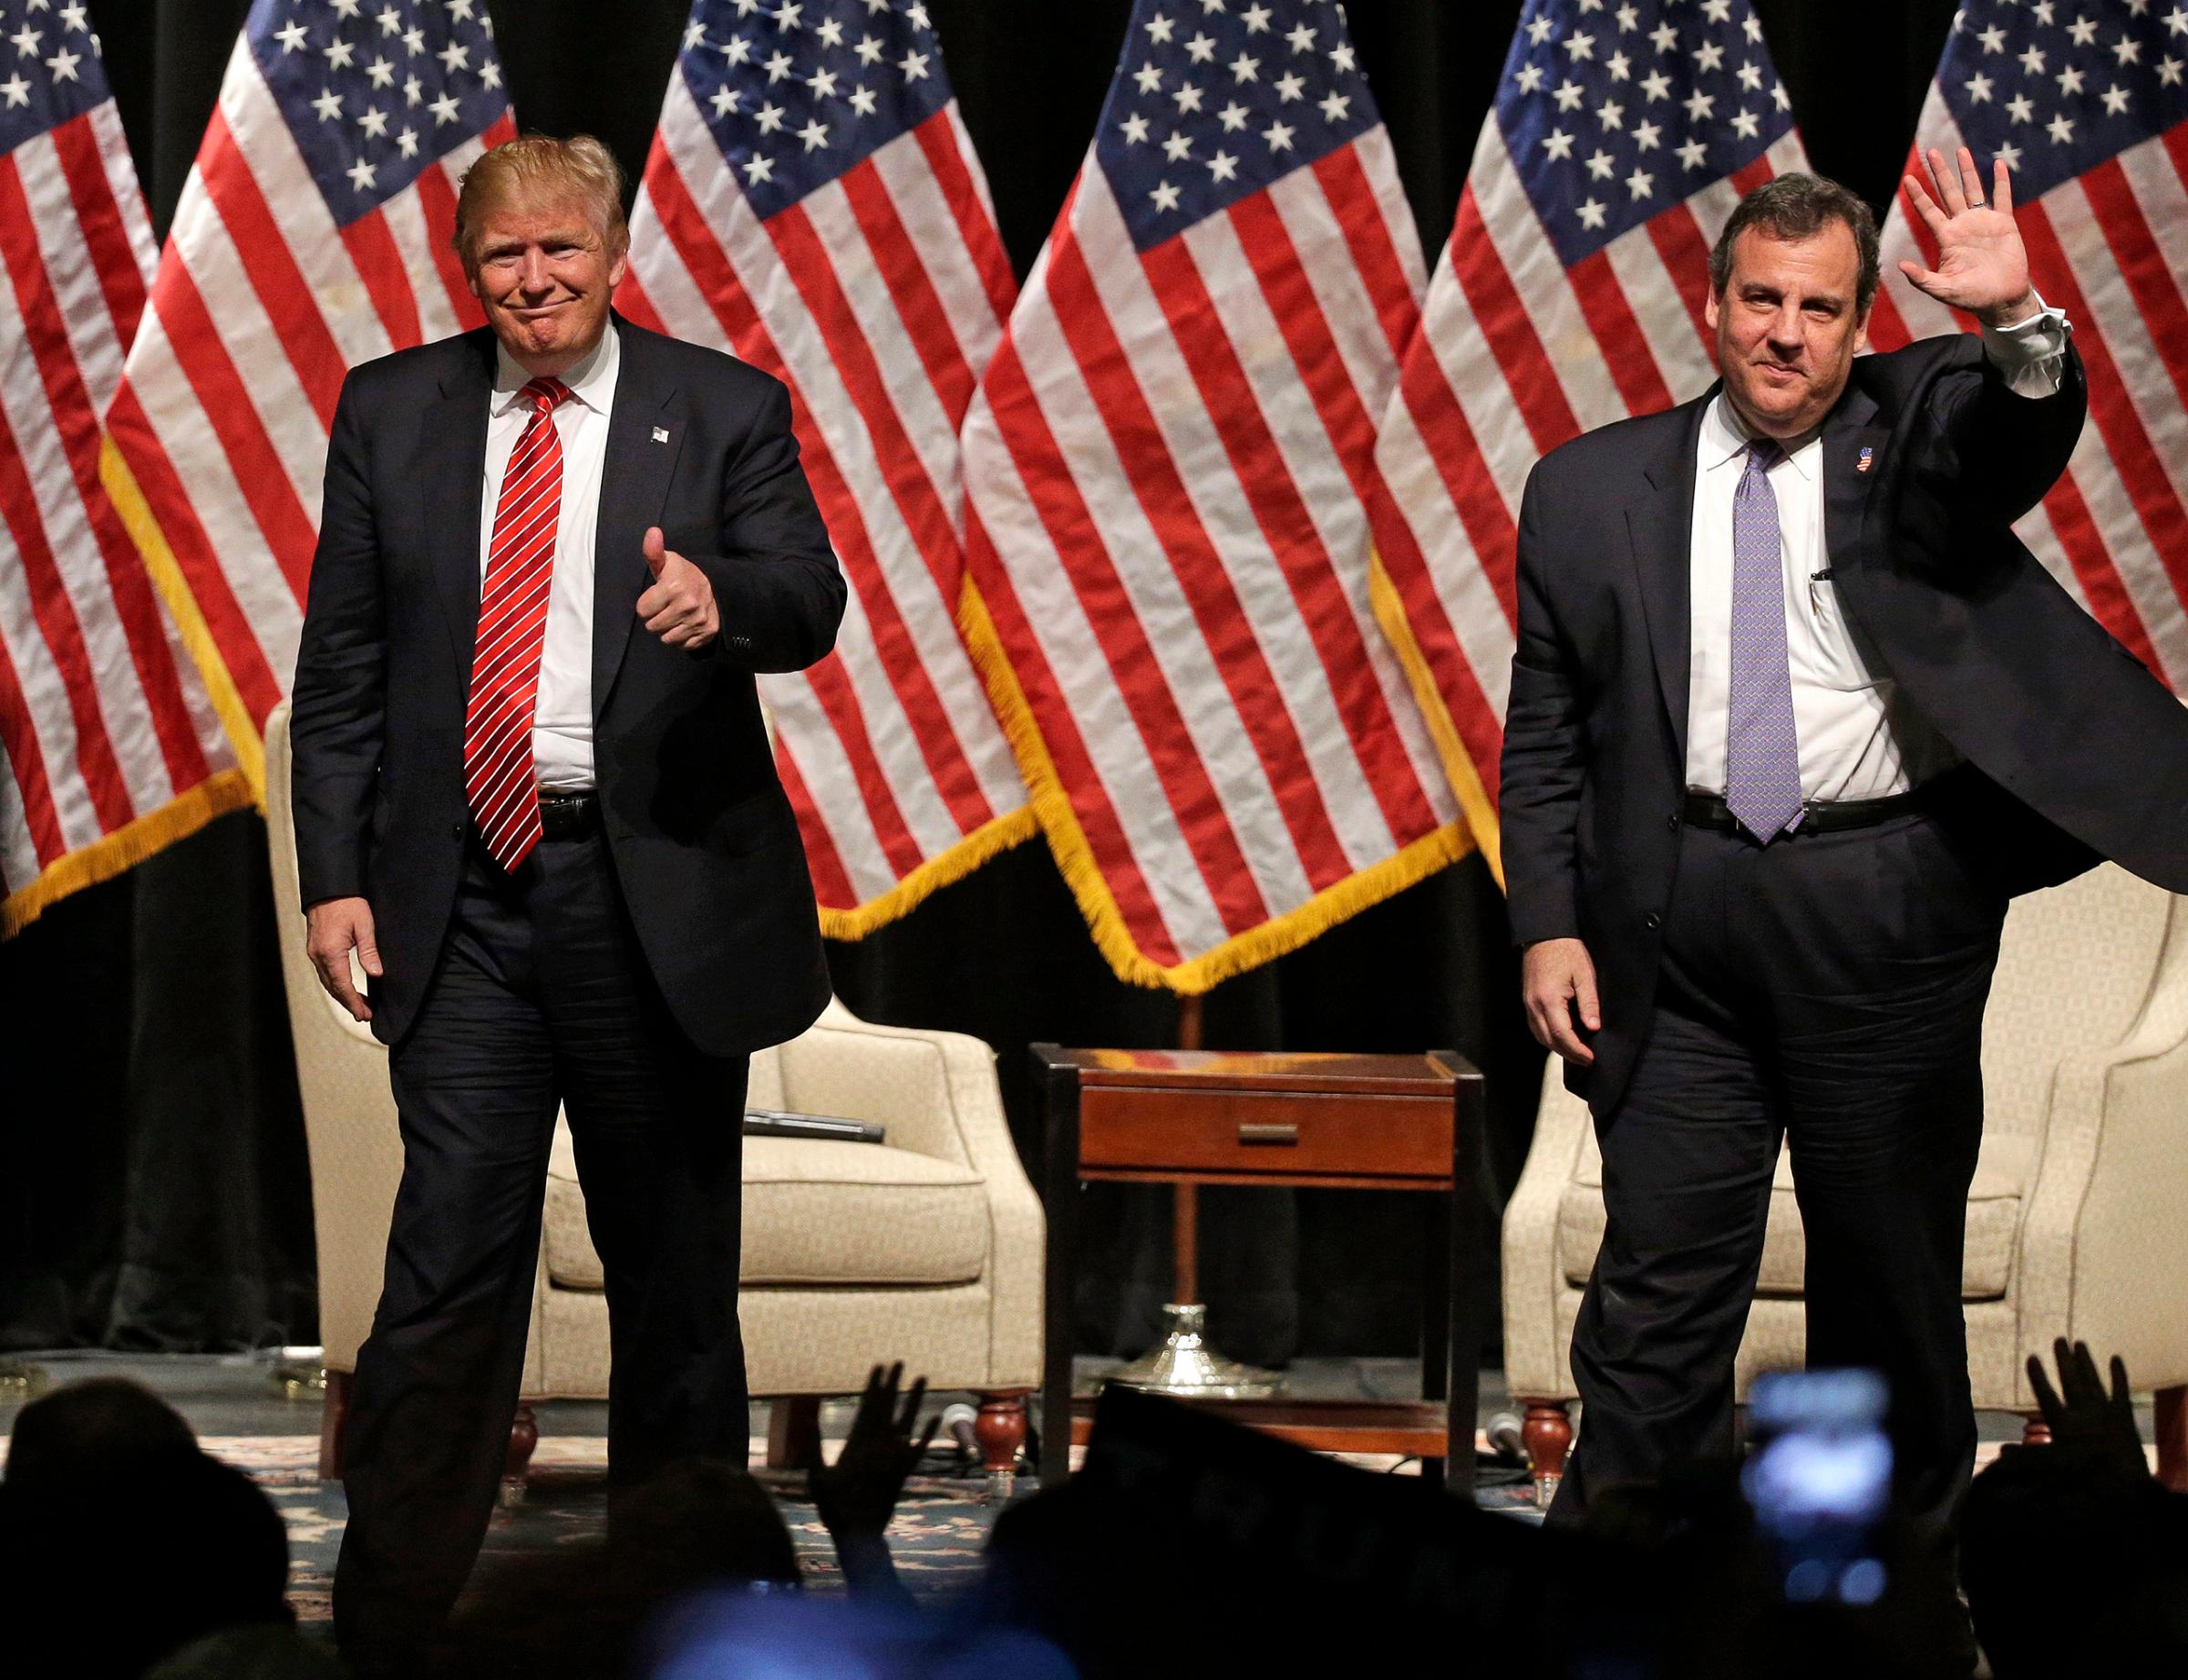 Donald Trump gives a thumbs up as New Jersey Gov. Chris Christie waves to the crowd as they walk off the stage after a rally at Lenoir-Rhyne University in Hickory, N.C., March 14, 2016.